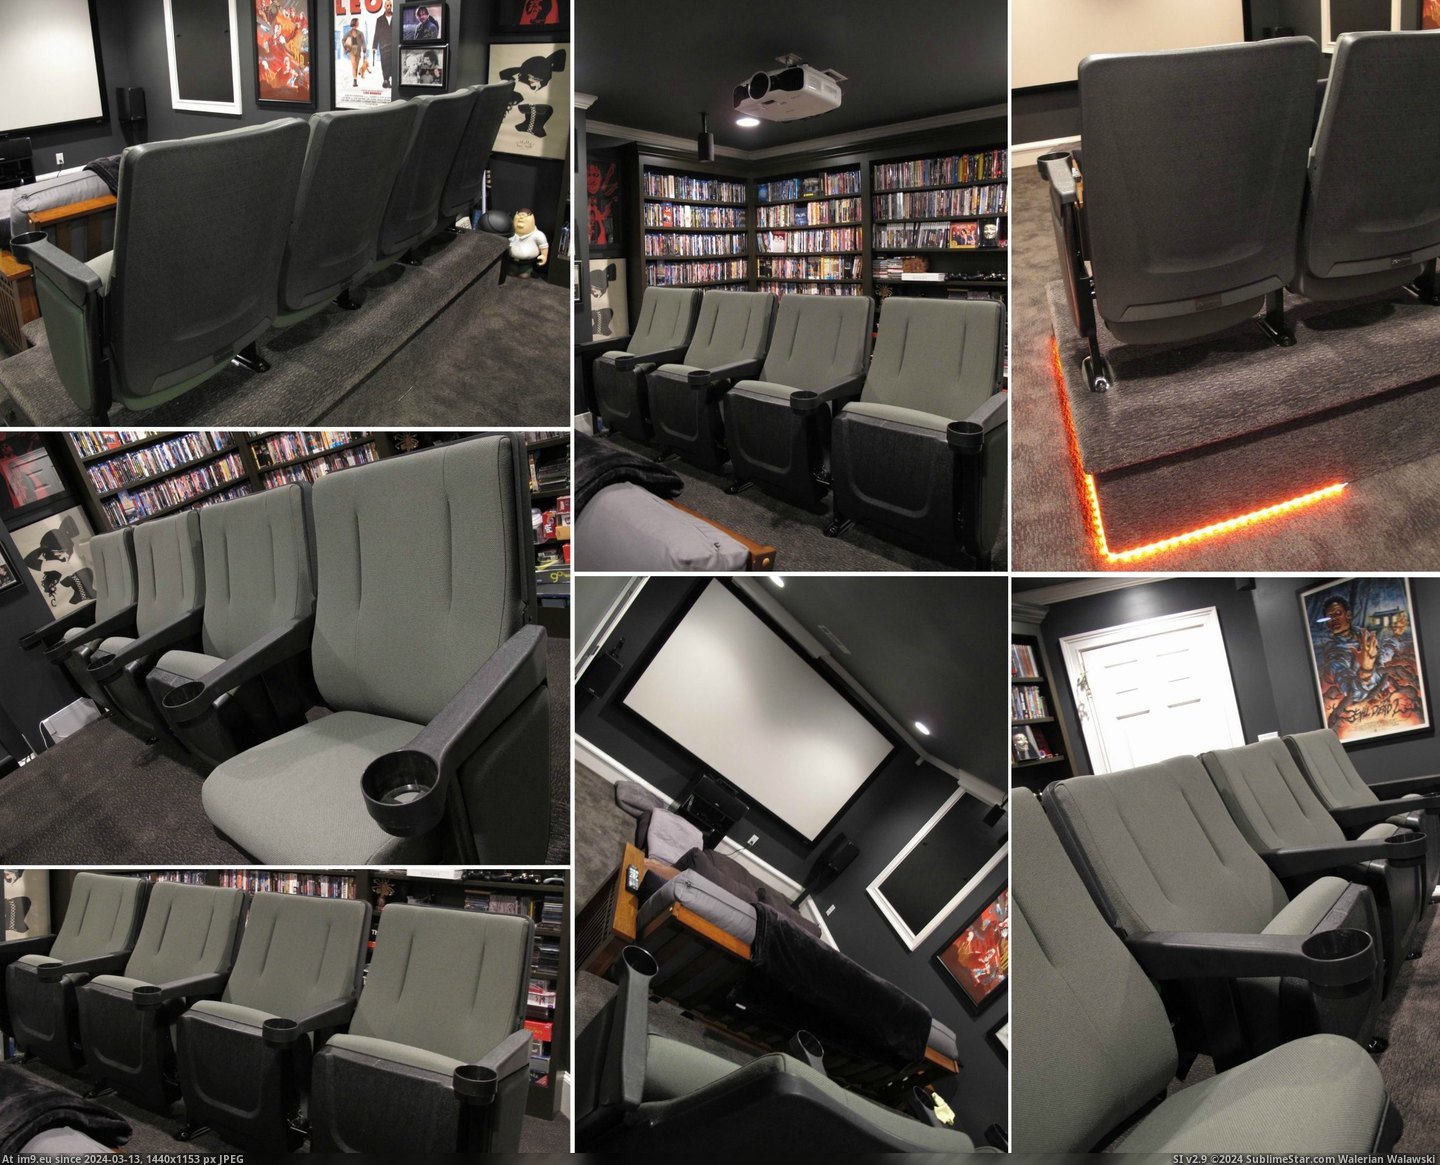 #Gaming #You #Movie #See #Theater #Added #Seats #Room #Wanted #Lot [Gaming] A lot of you wanted to see my movie-gaming room after the theater seats were added. Well...here ya go. :-) Pic. (Bild von album My r/GAMING favs))